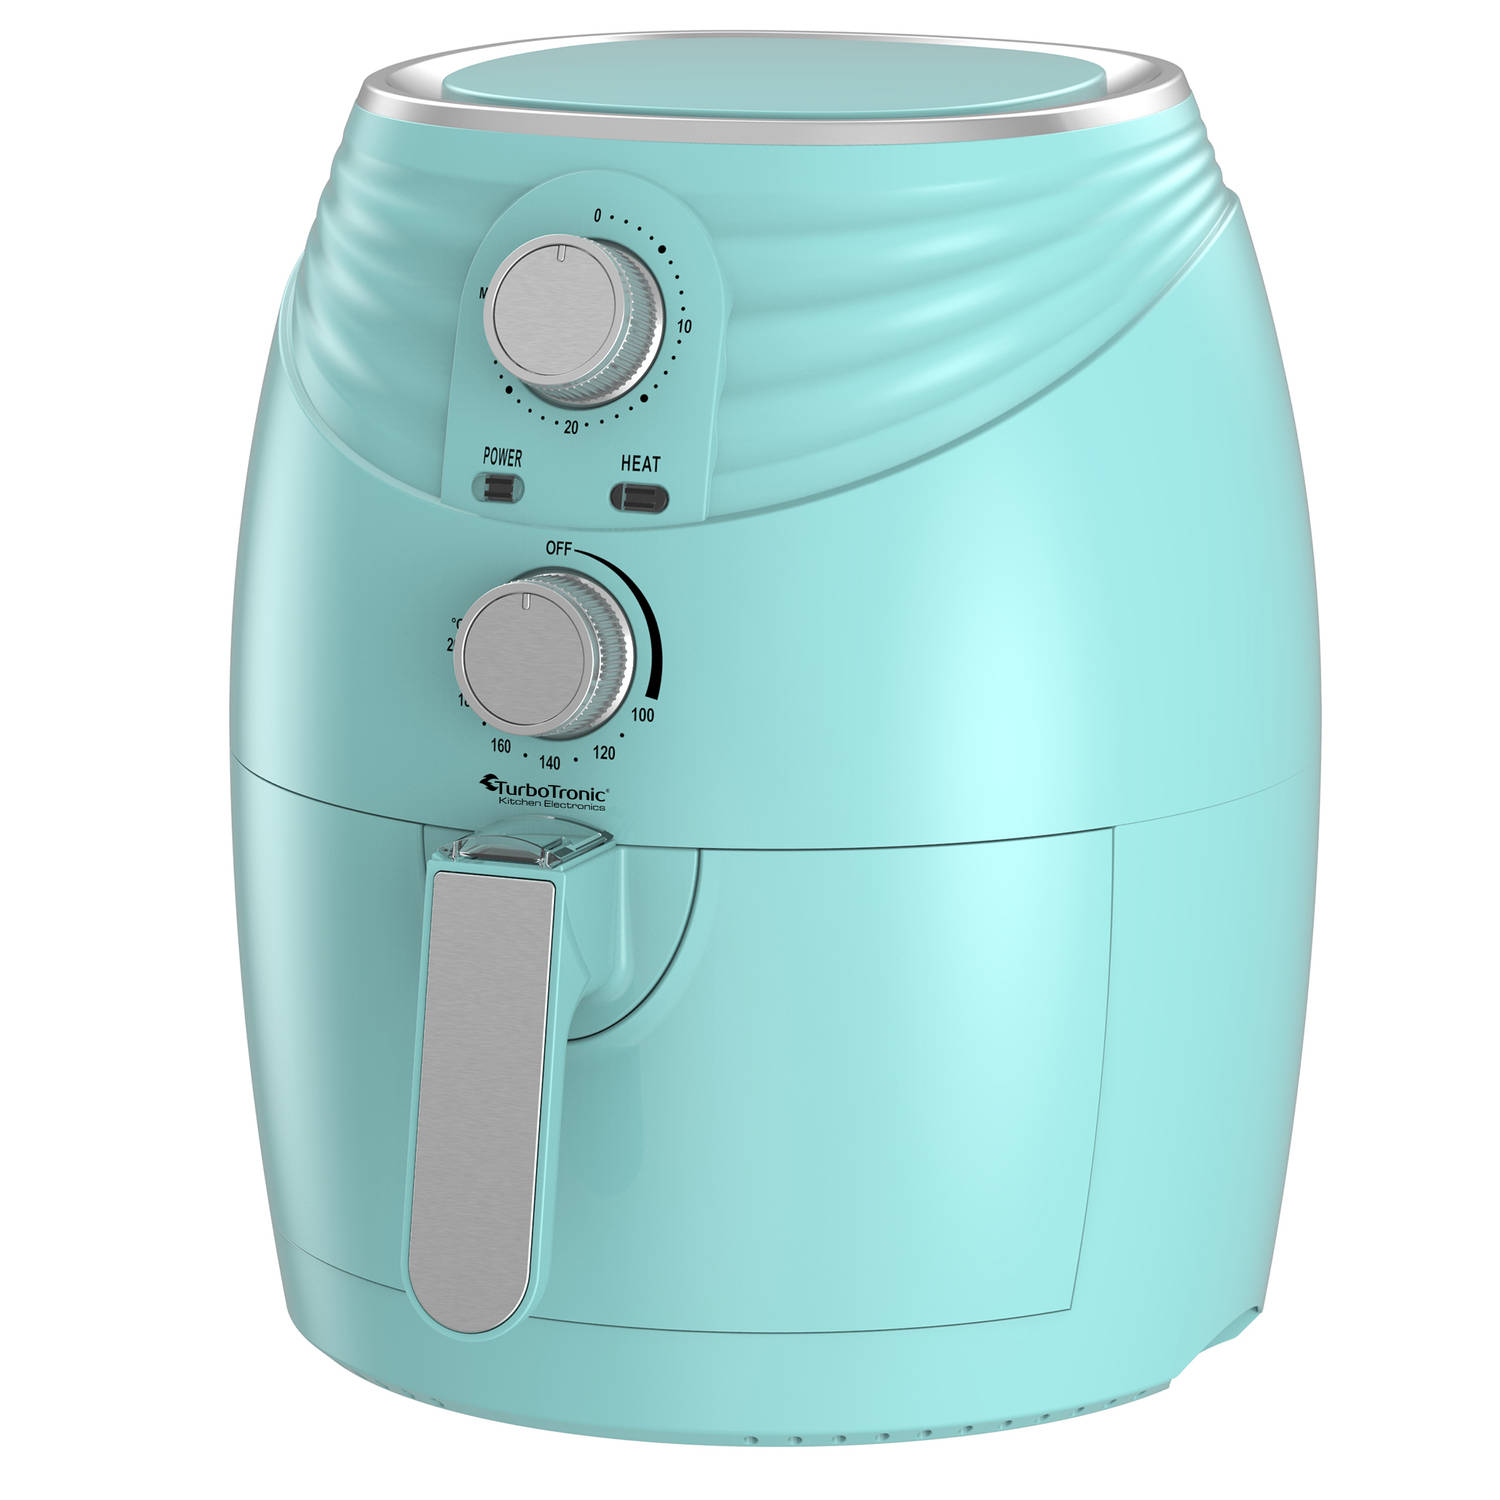 Turbotronic Af11m Airfryer Heteluchtfriteuse 3.5 Liter Turquoise